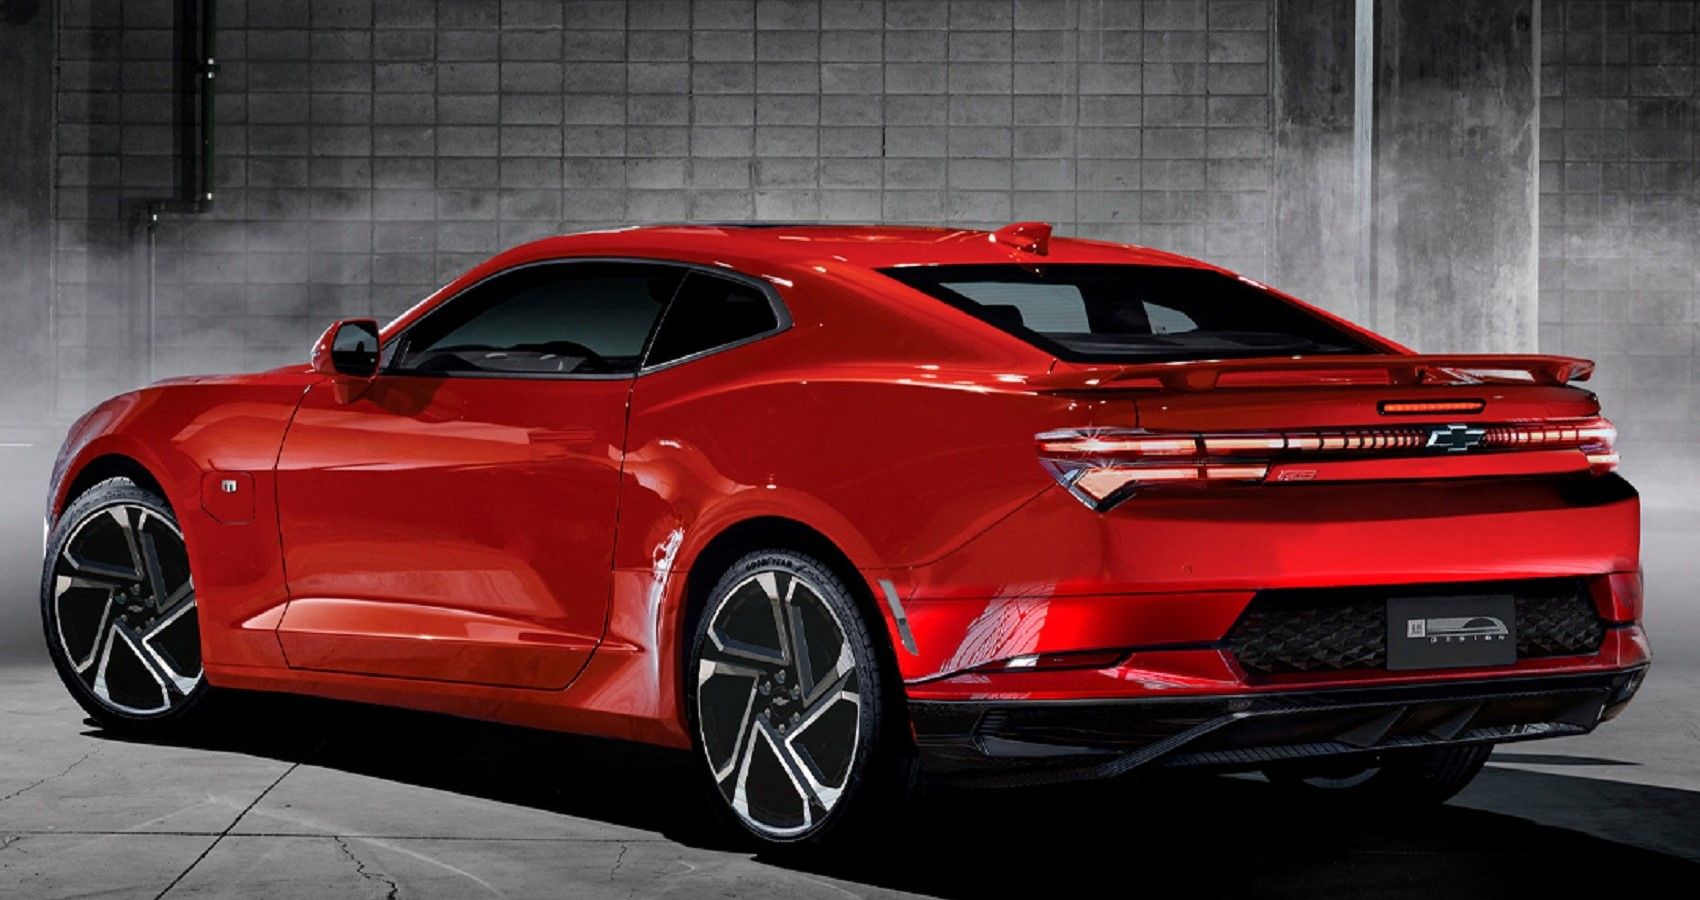 This Render Of A Chevrolet Camaro EV Shows We Shouldn't Fear The Future